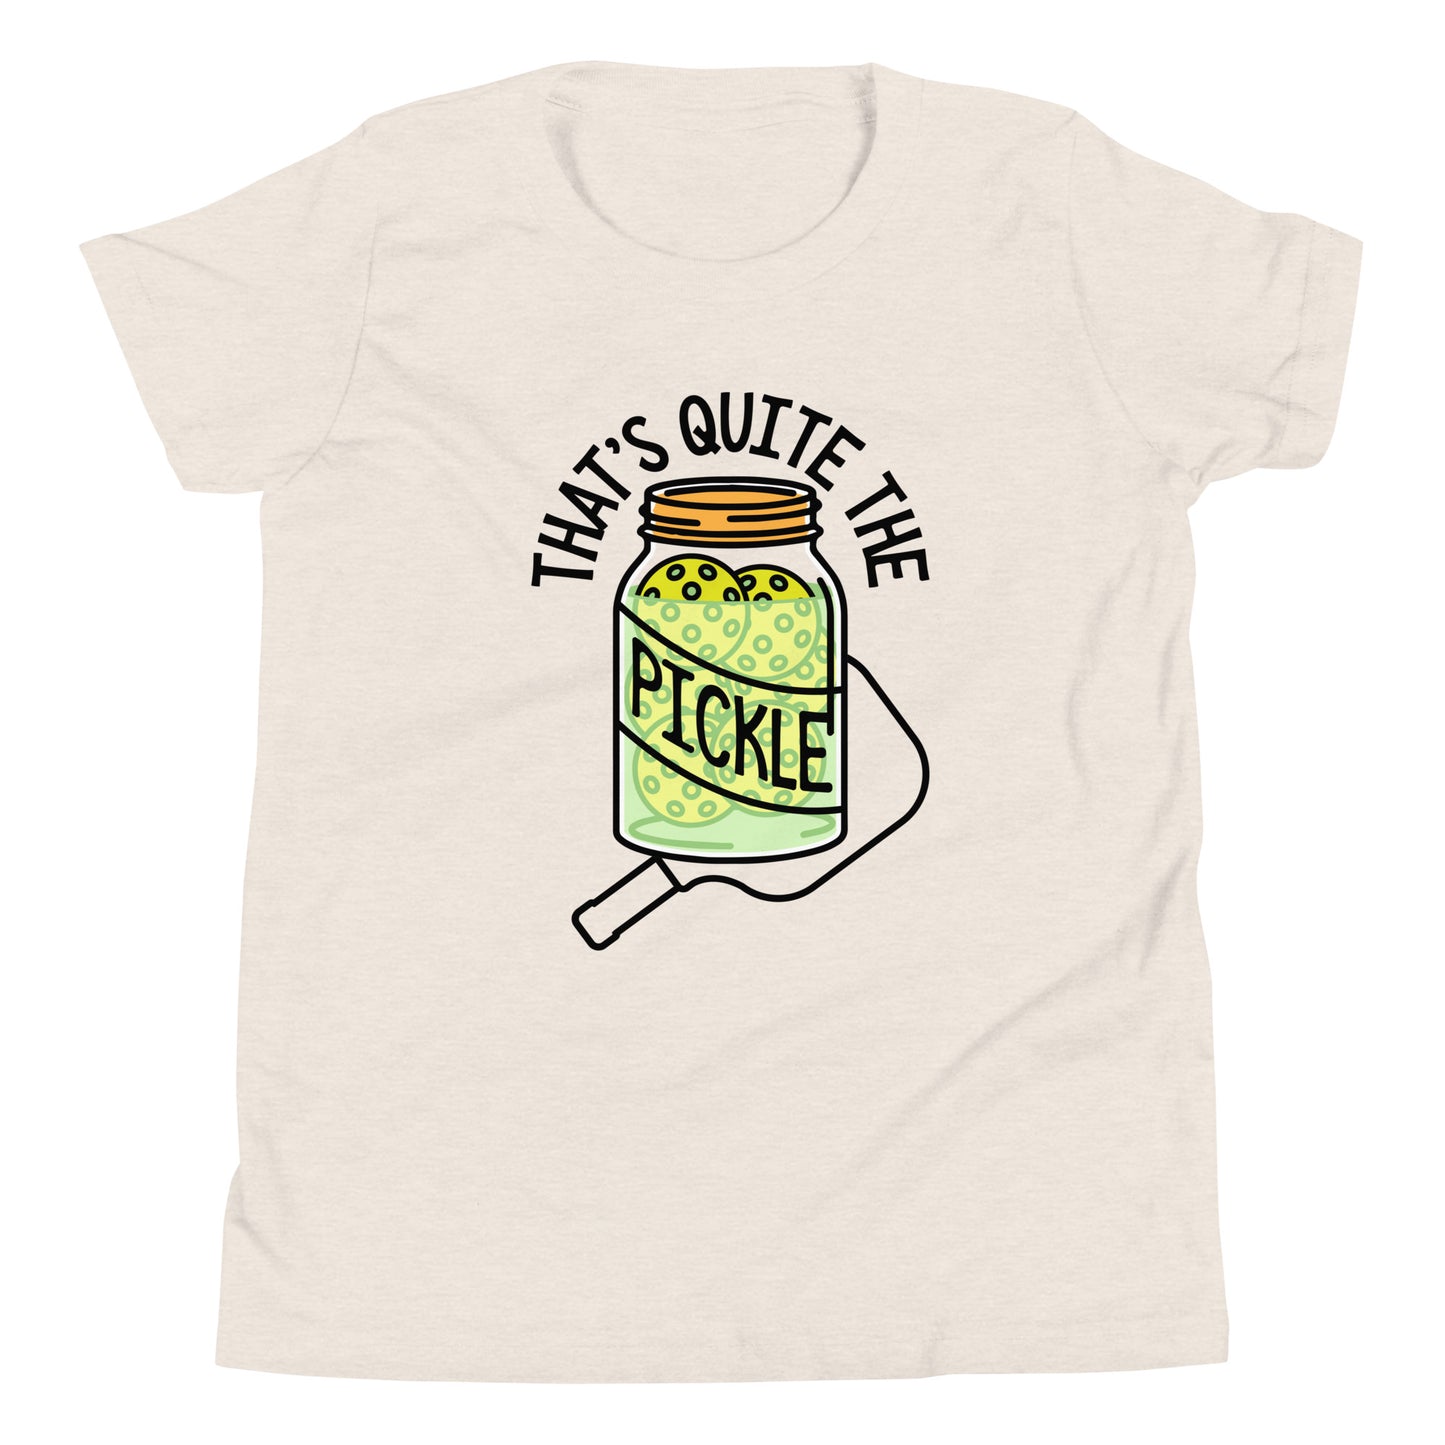 That's Quite The Pickle Kid's Youth Tee